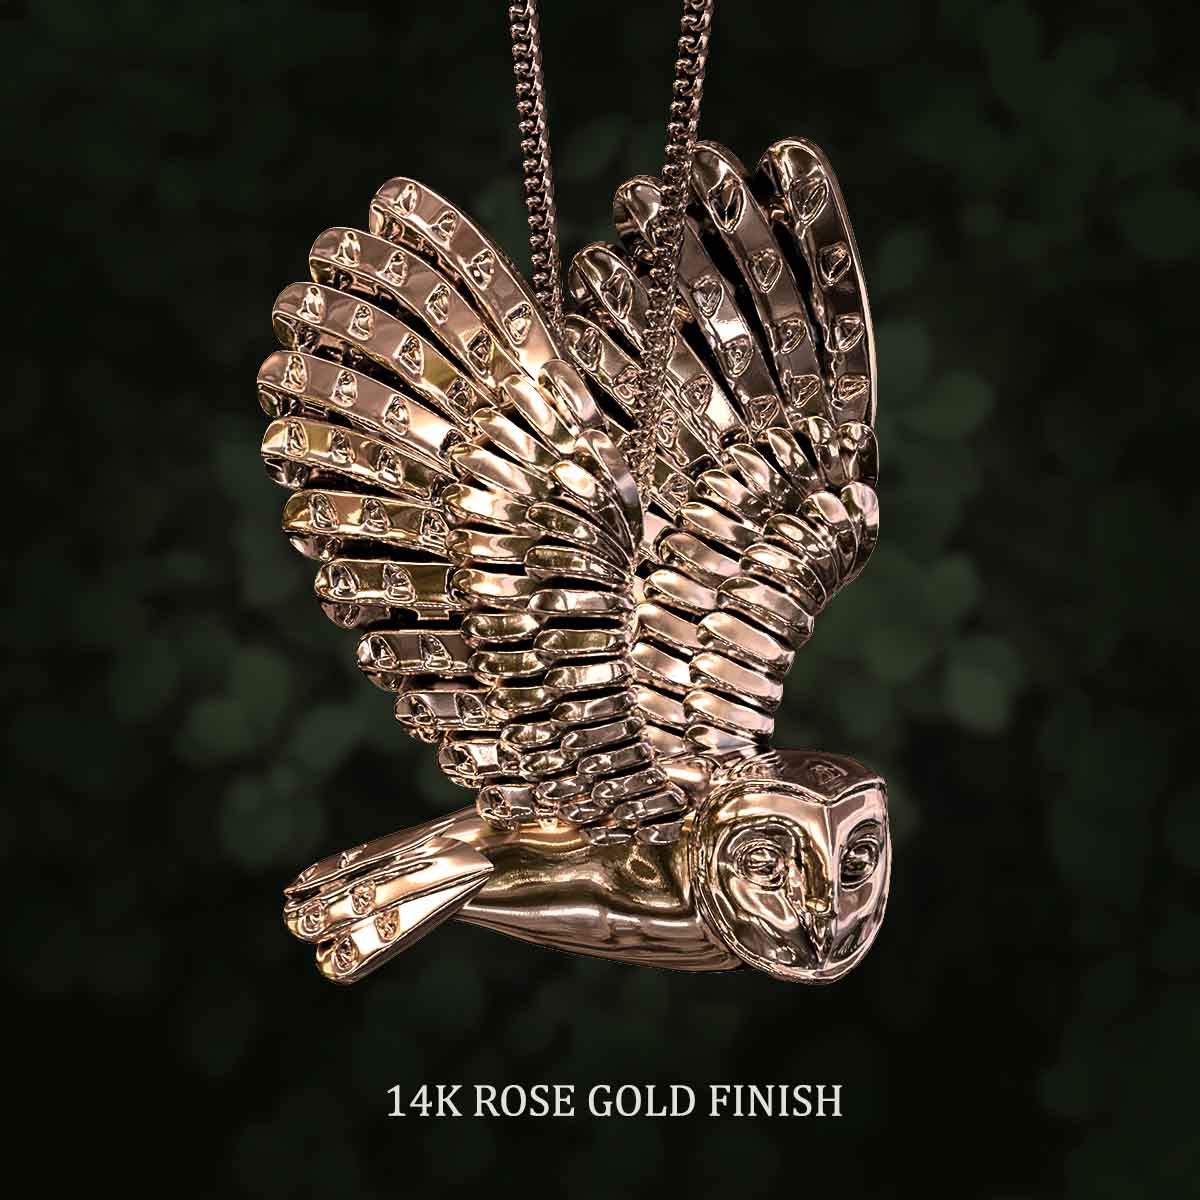     14k-Rose-Gold-Finish-Barn-Owl-Wings-Up-Pendant-Jewelry-For-Necklace